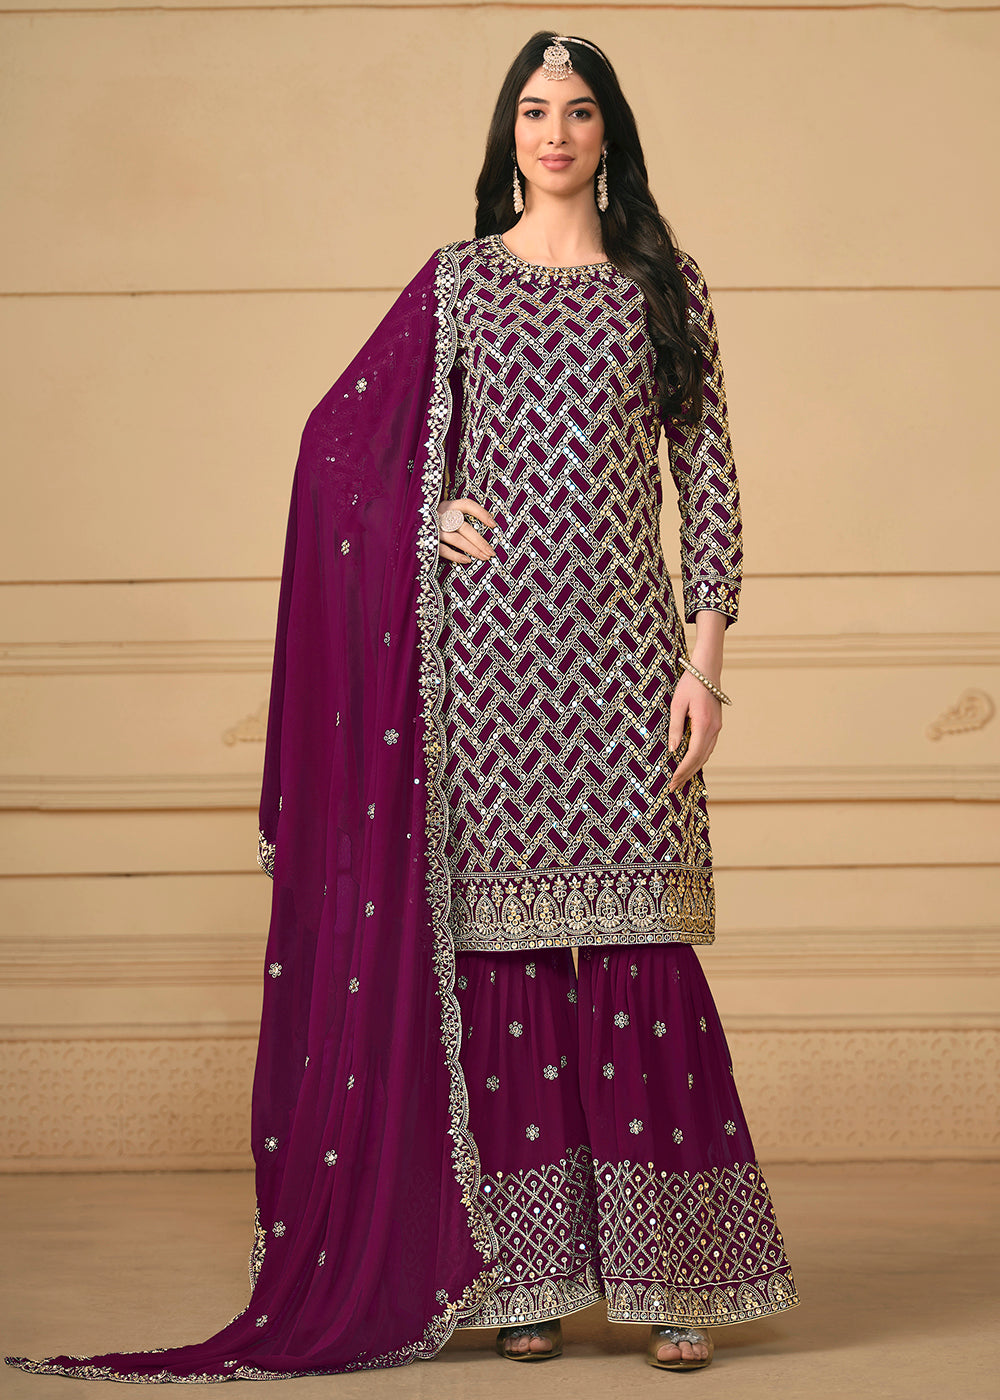 Shop Now Georgette Purple Embroidered Gharara Style Suit Online at Empress Clothing in USA, UK, Canada, Italy & Worldwide. 